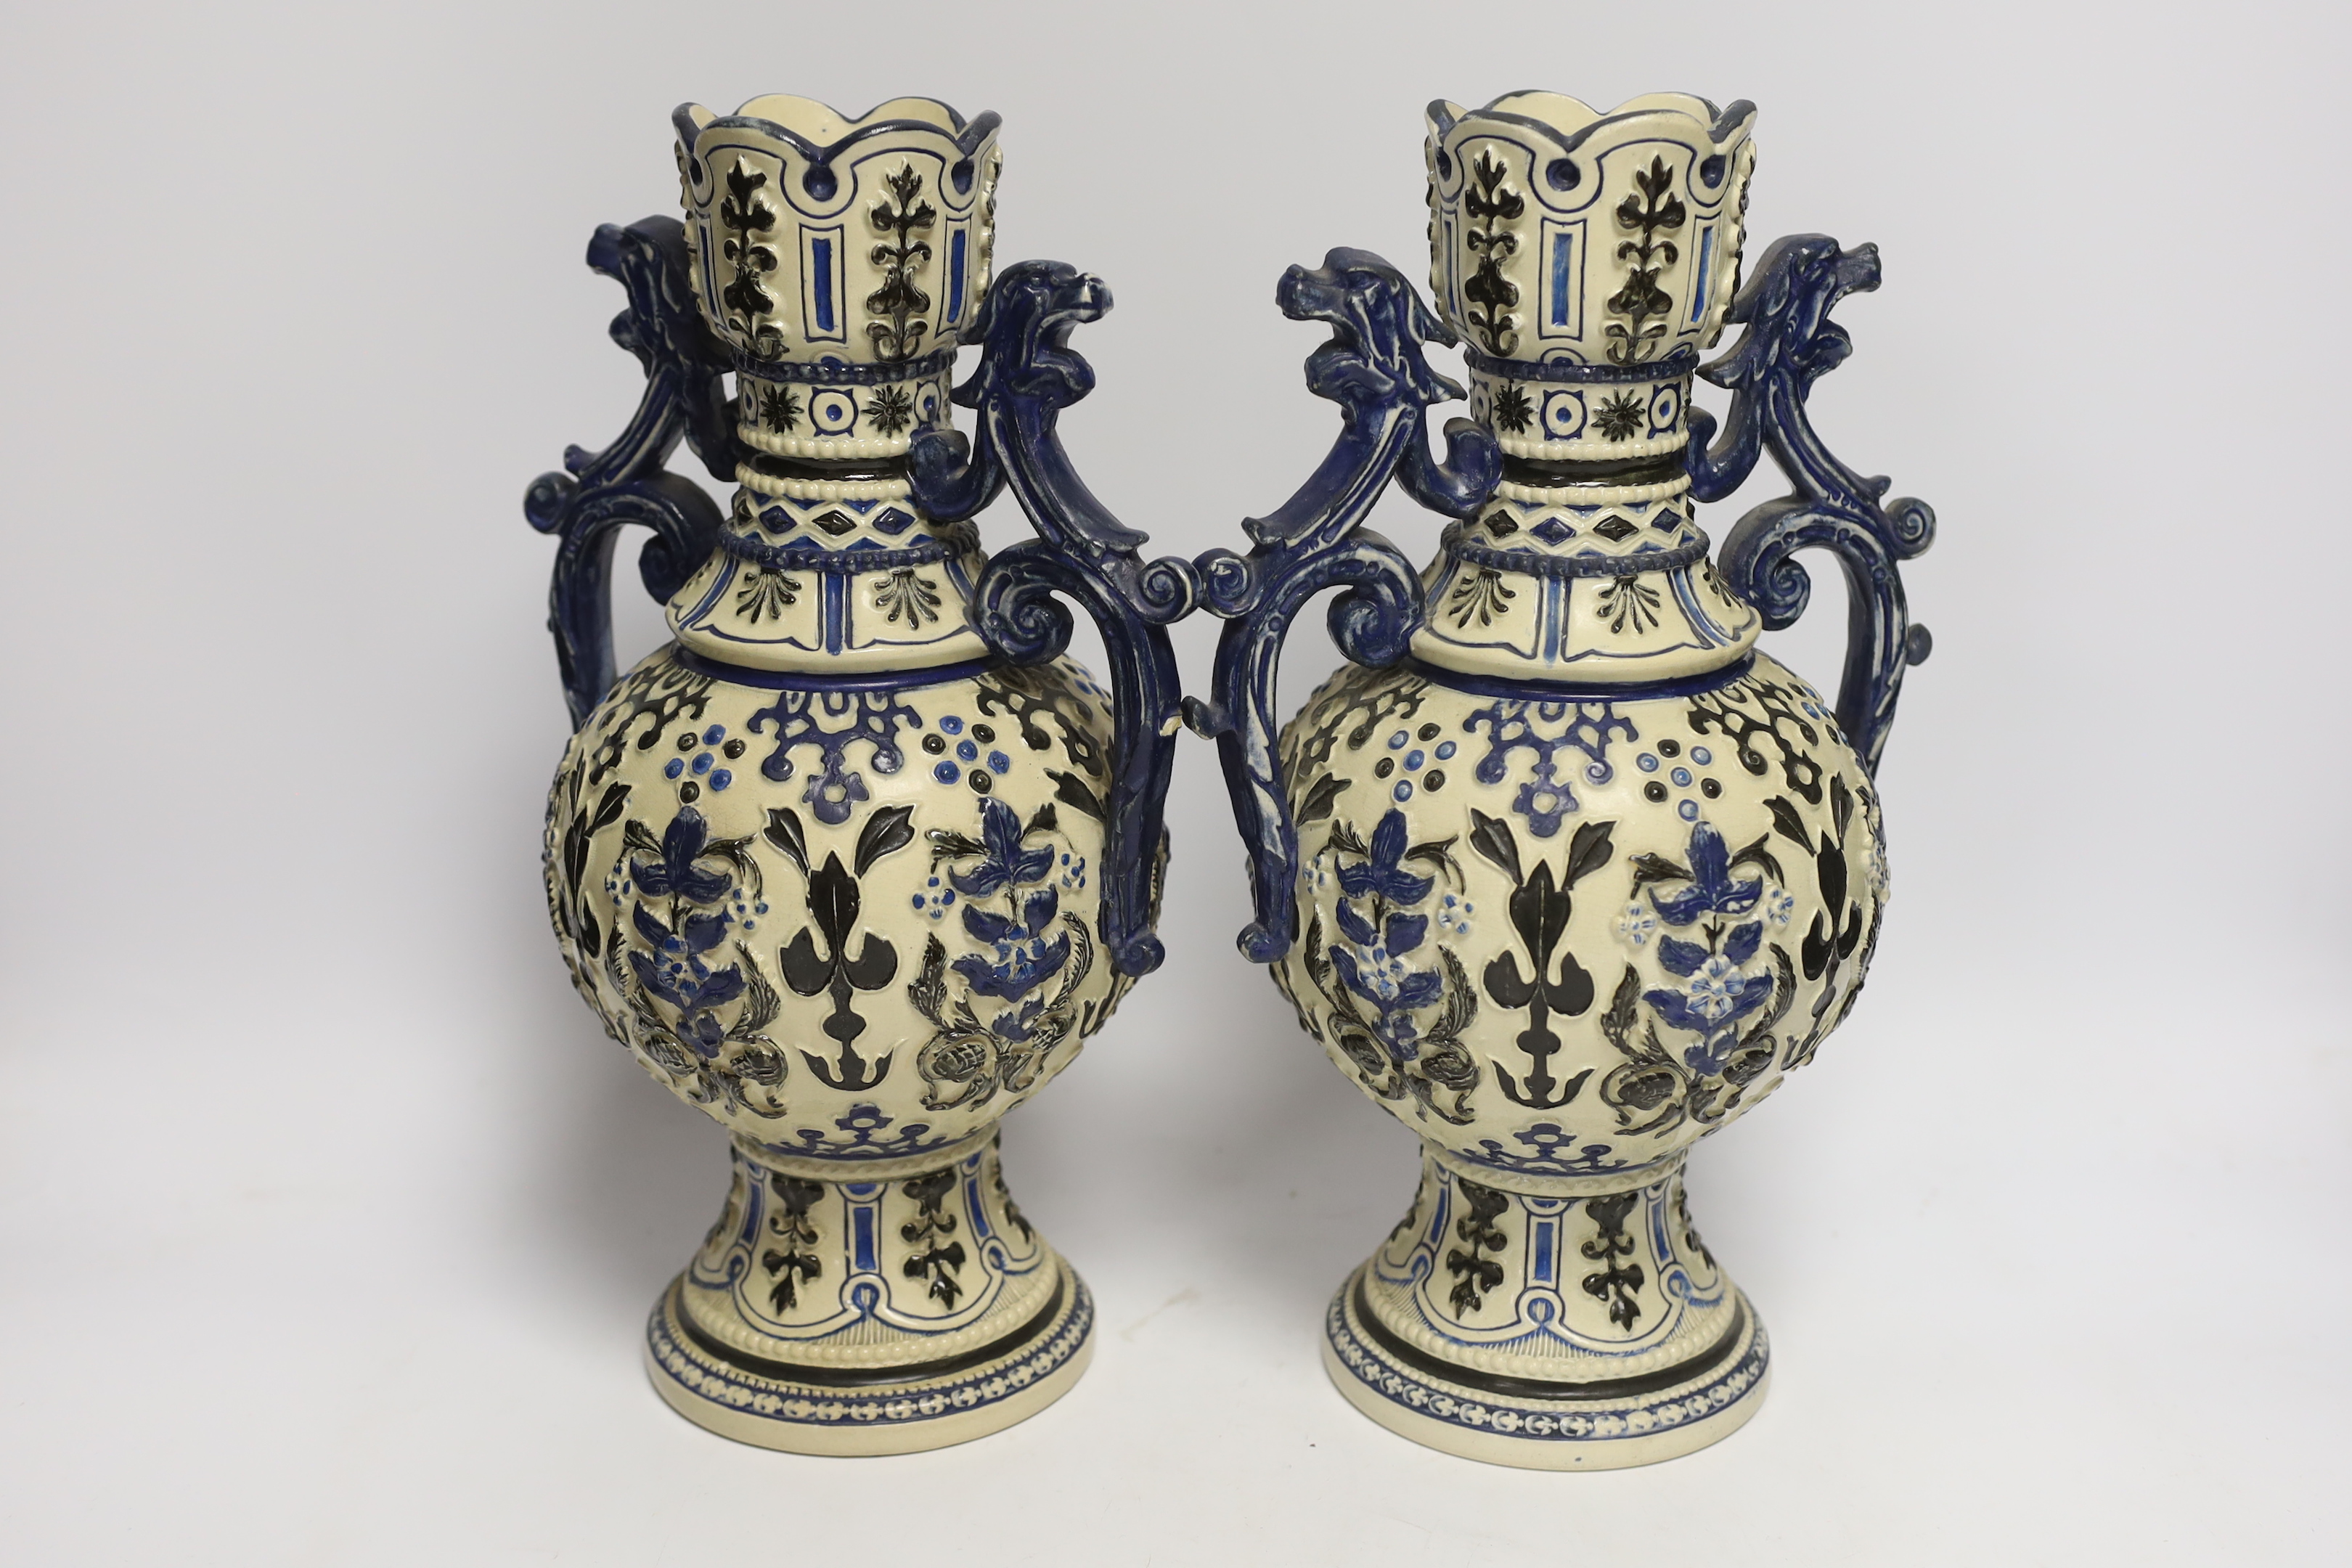 A pair of 20th century German pottery vases, 32cm